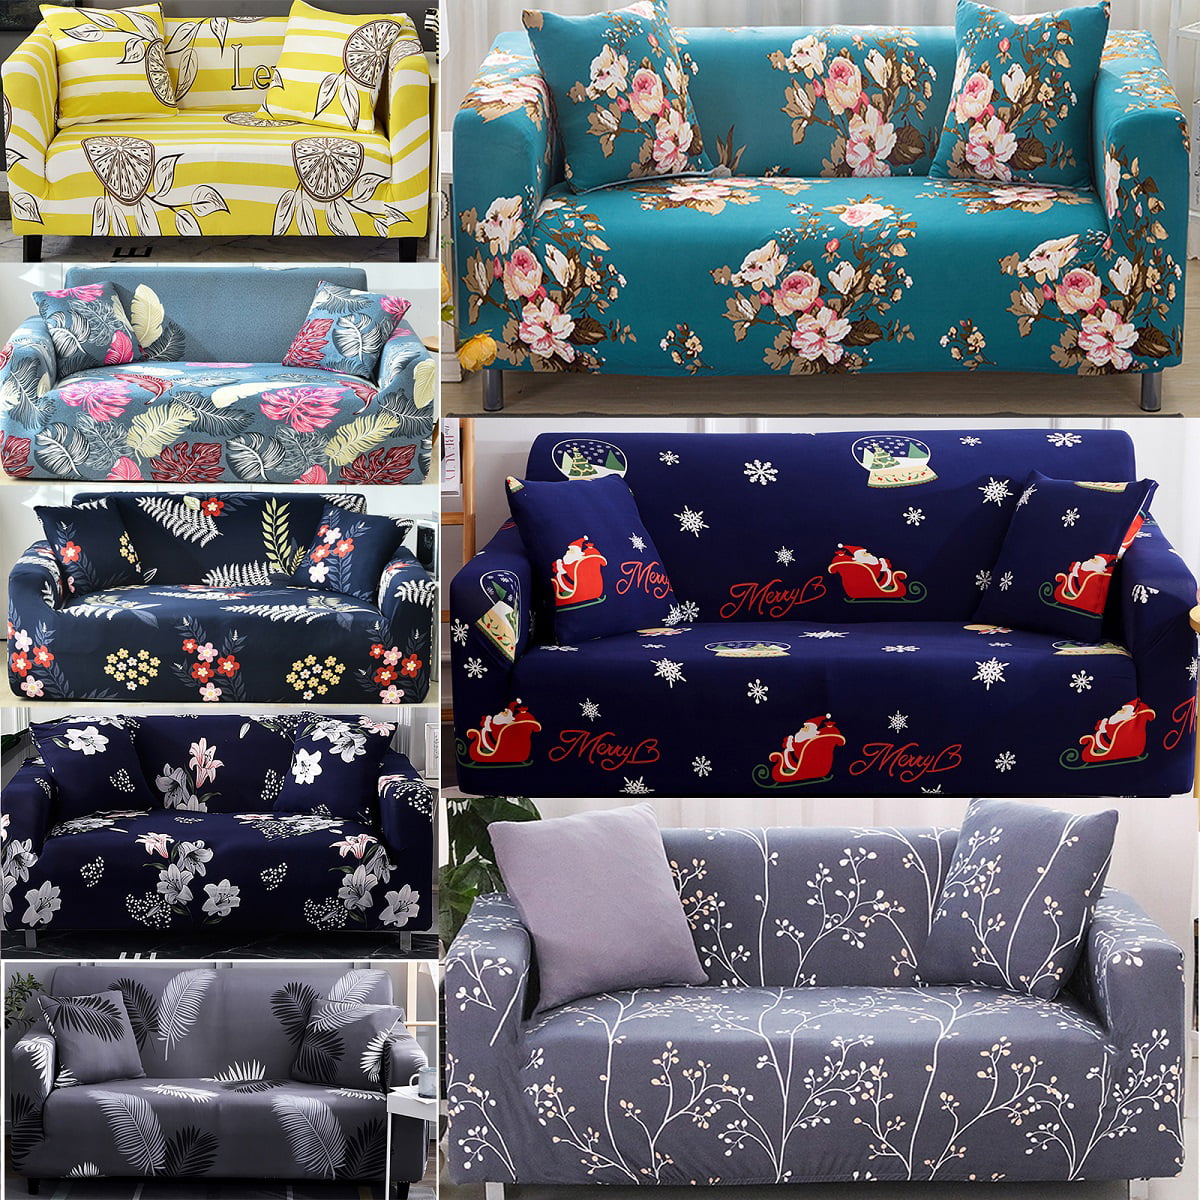 1 2 3 4 Seater Slipcover Floral Print Sofa Cover Stretch Elastic Couch Protector 